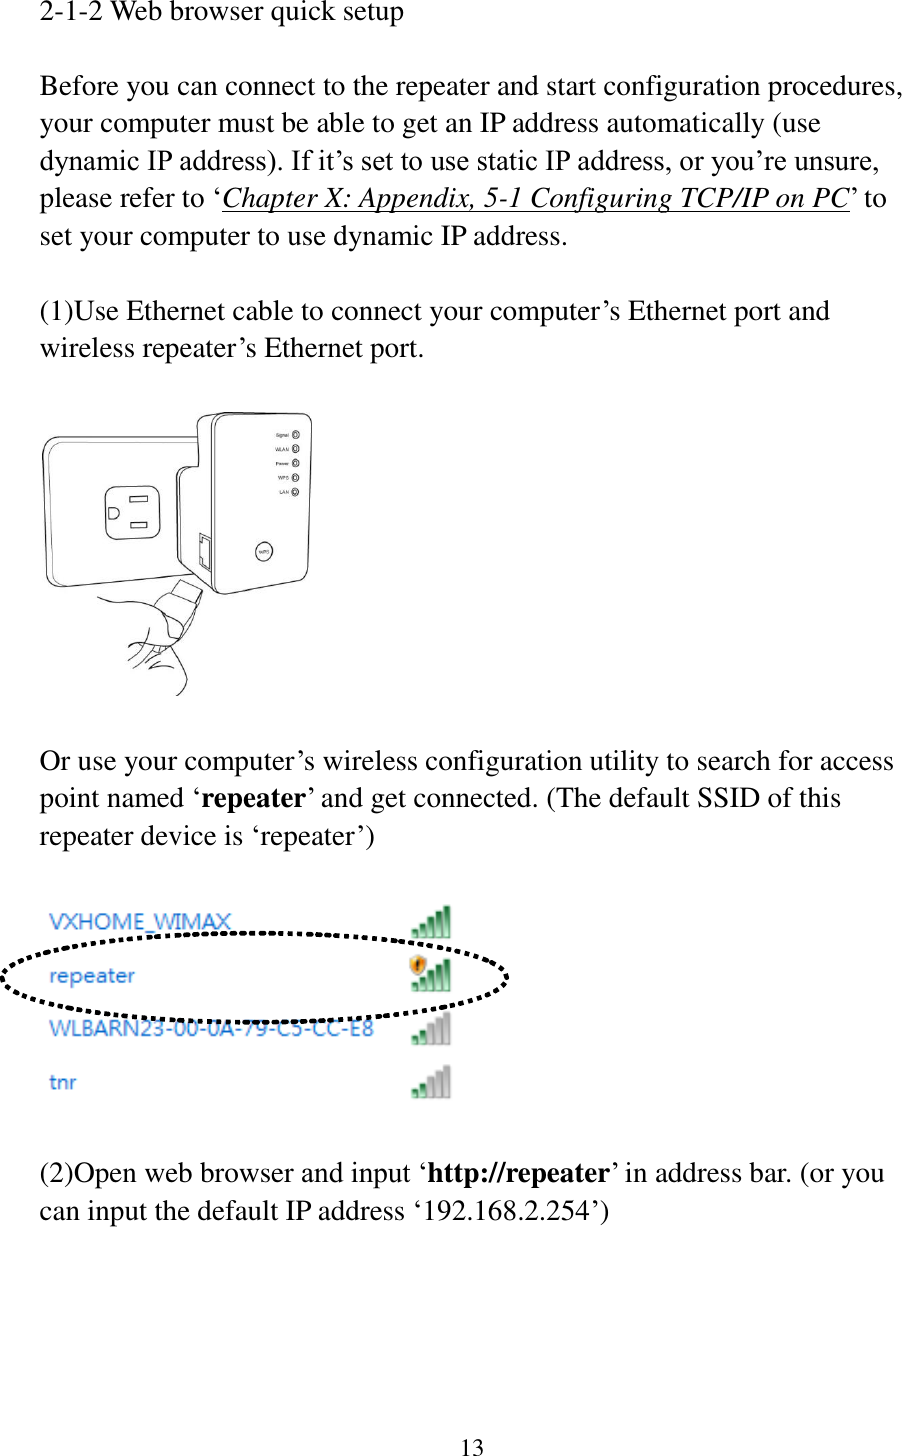 13  2-1-2 Web browser quick setup  Before you can connect to the repeater and start configuration procedures, your computer must be able to get an IP address automatically (use dynamic IP address). If it‟s set to use static IP address, or you‟re unsure, please refer to „Chapter X: Appendix, 5-1 Configuring TCP/IP on PC‟ to set your computer to use dynamic IP address.  (1)Use Ethernet cable to connect your computer‟s Ethernet port and wireless repeater‟s Ethernet port.    Or use your computer‟s wireless configuration utility to search for access point named „repeater‟ and get connected. (The default SSID of this repeater device is „repeater‟)    (2)Open web browser and input „http://repeater‟ in address bar. (or you can input the default IP address „192.168.2.254‟)  